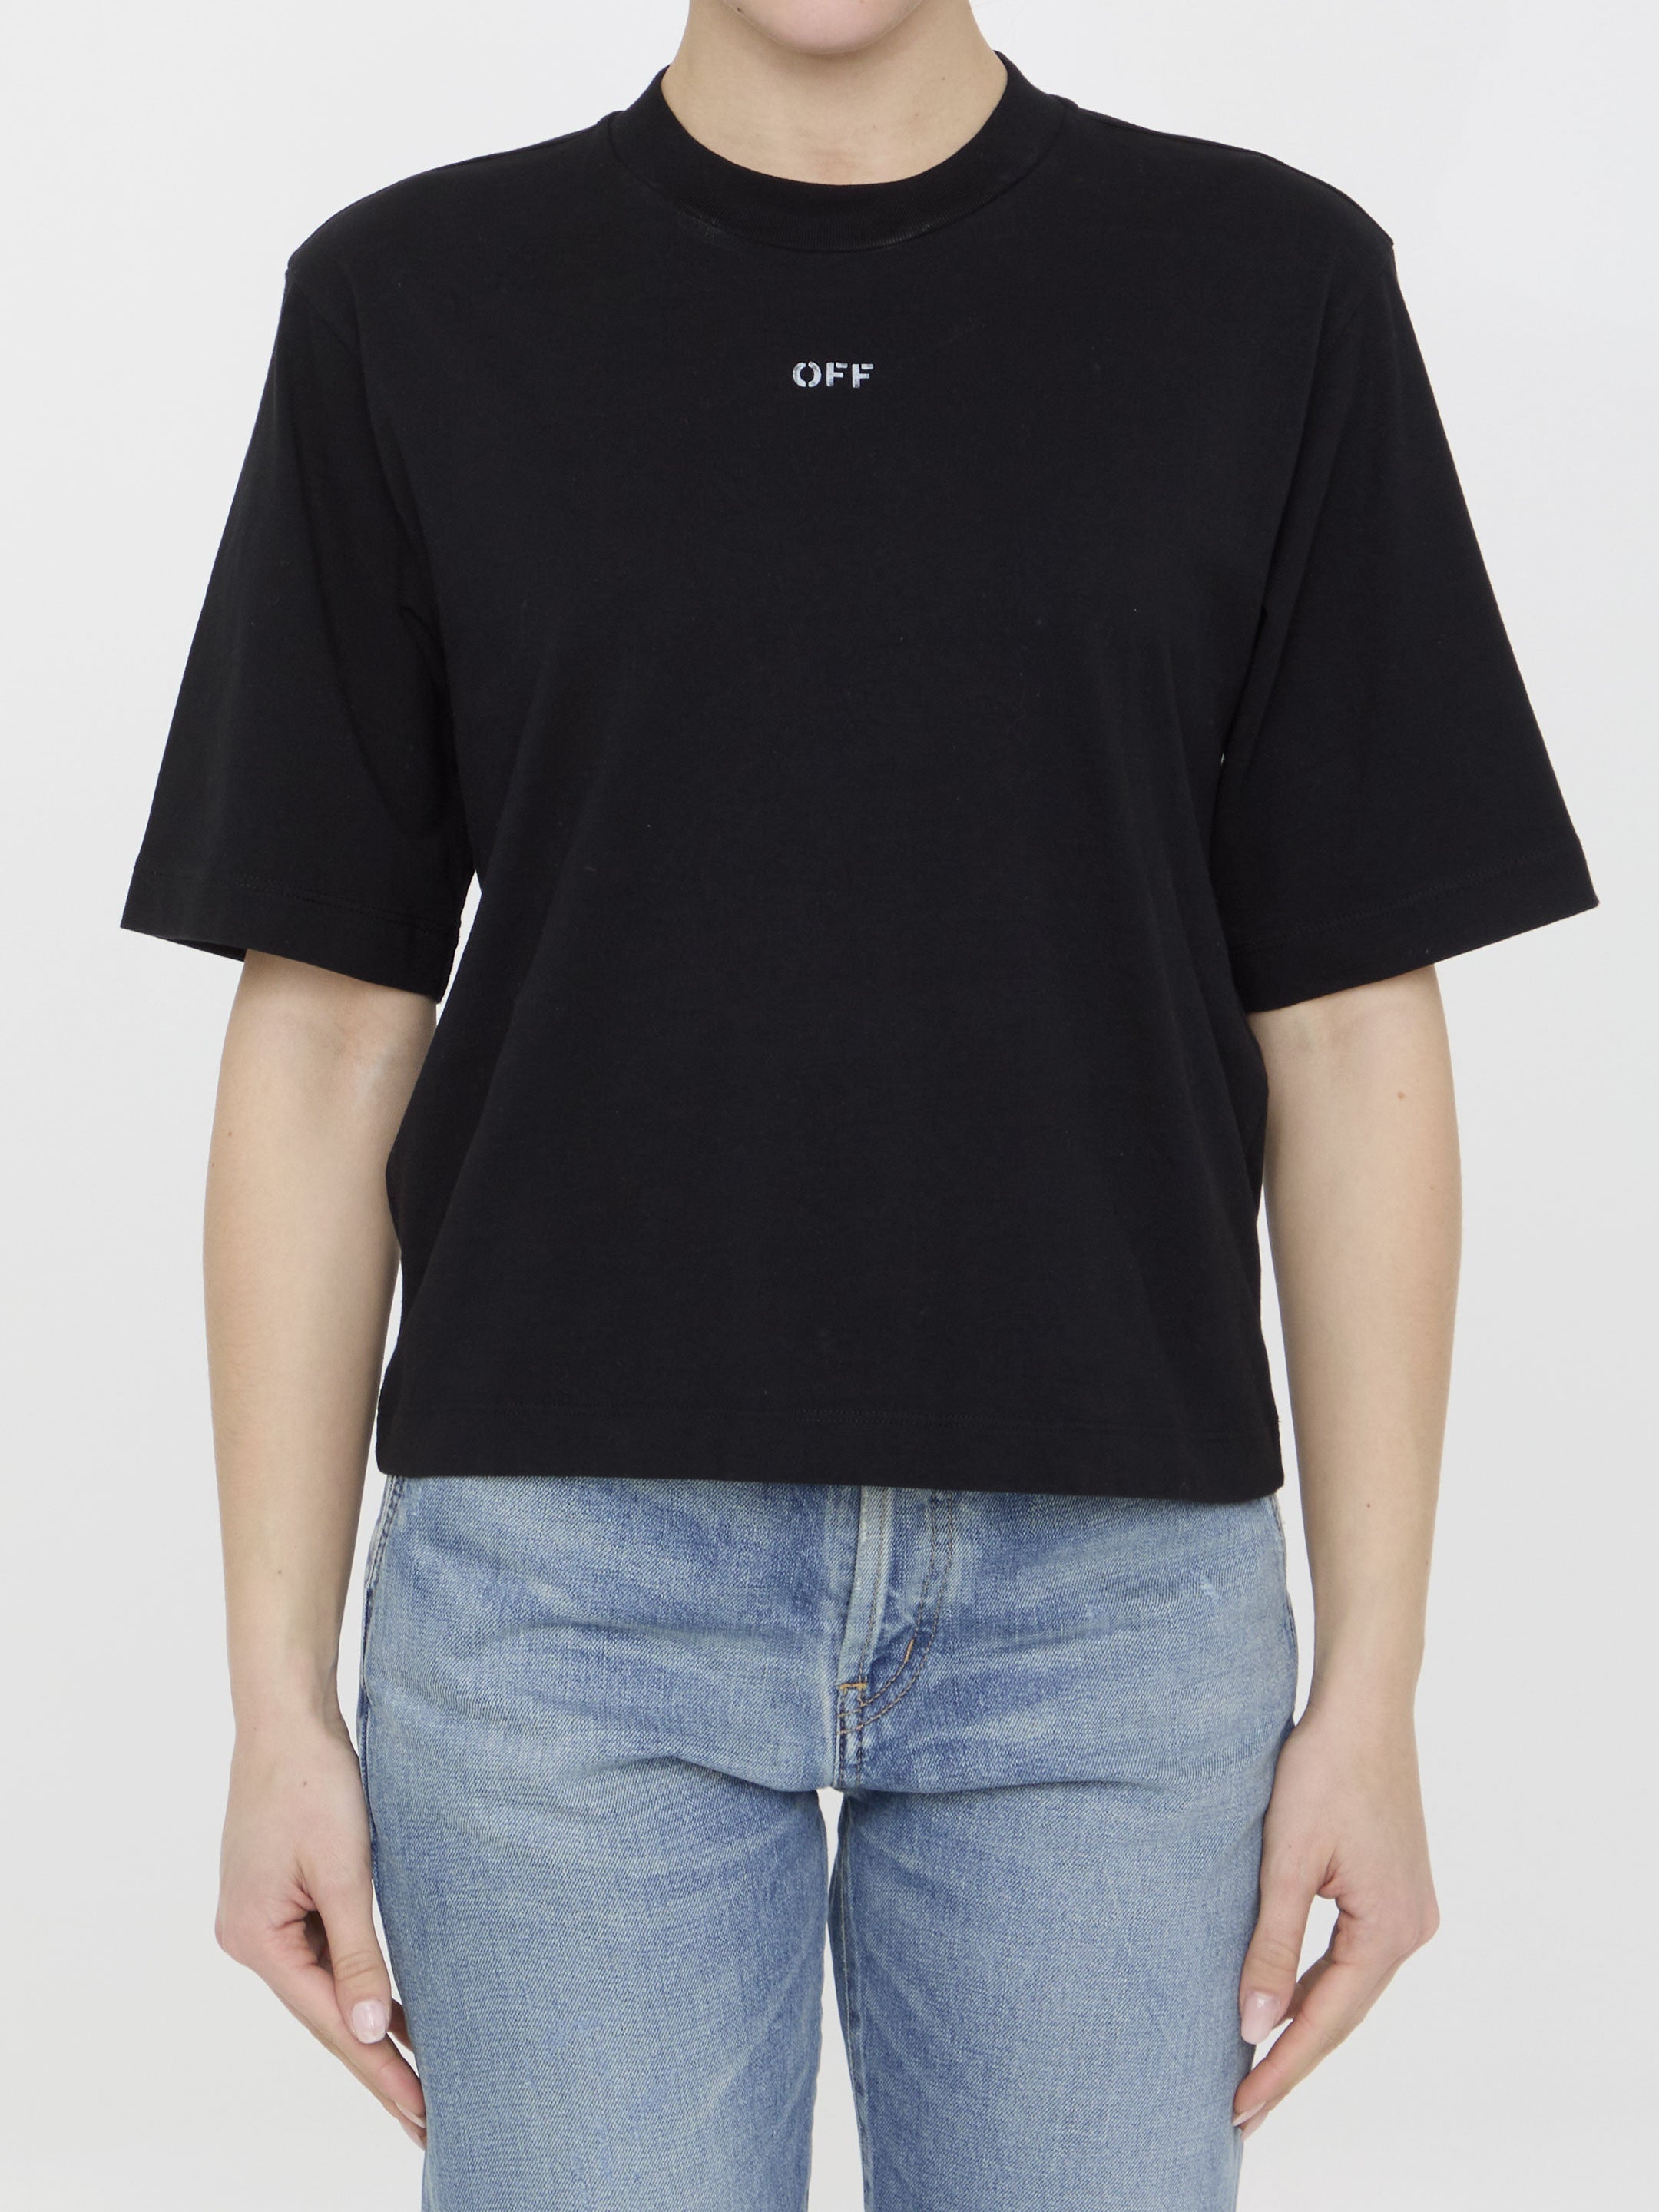 OFF-WHITE-OUTLET-SALE-Arrow-t-shirt-Shirts-M-BLACK-ARCHIVE-COLLECTION.jpg